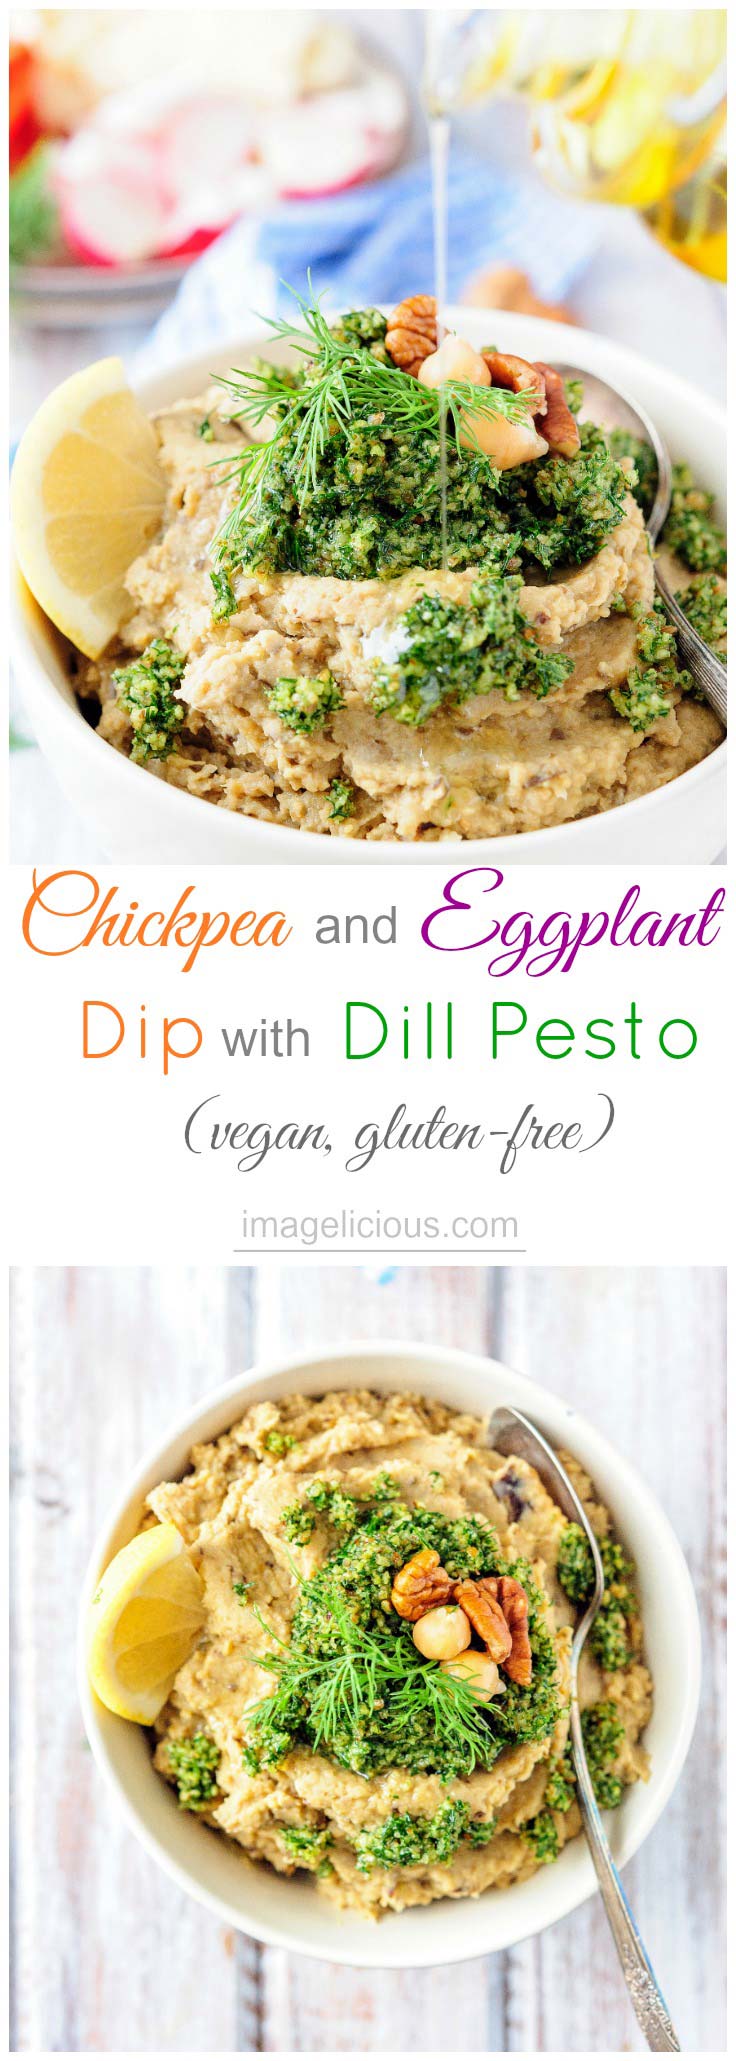 Chickpea and Eggplant Dip with Dill Pesto is full of bright and bold flavours, yet easy to make and very healthy. It's vegan and gluten-free and will satisfy even the pickiest eaters. Perfect appetizer or snack | Imagelicious